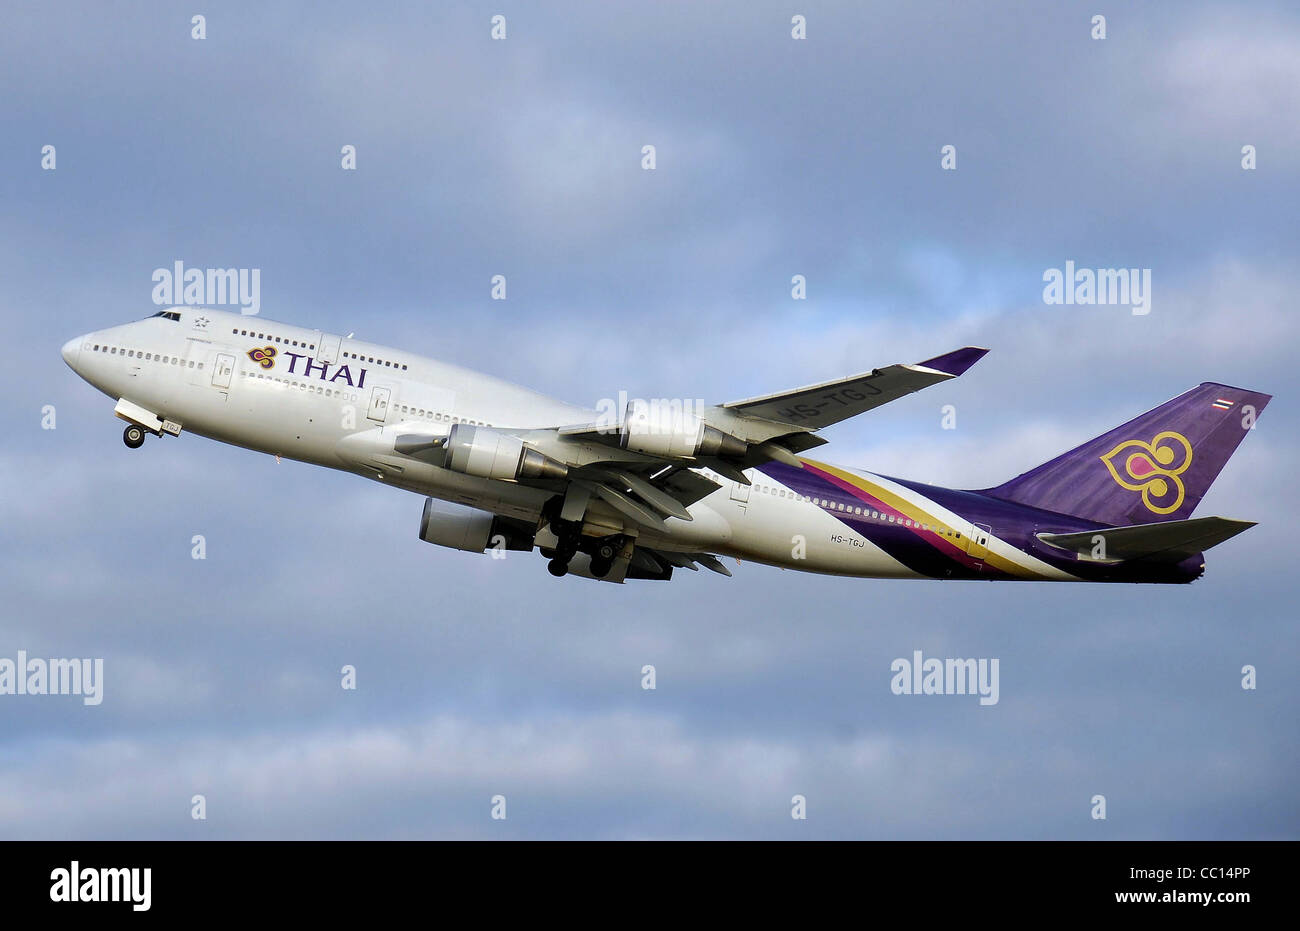 Thai Airways Boeing 747-400 (HS-TGJ) taking off from London Heathrow Airport, England. Stock Photo